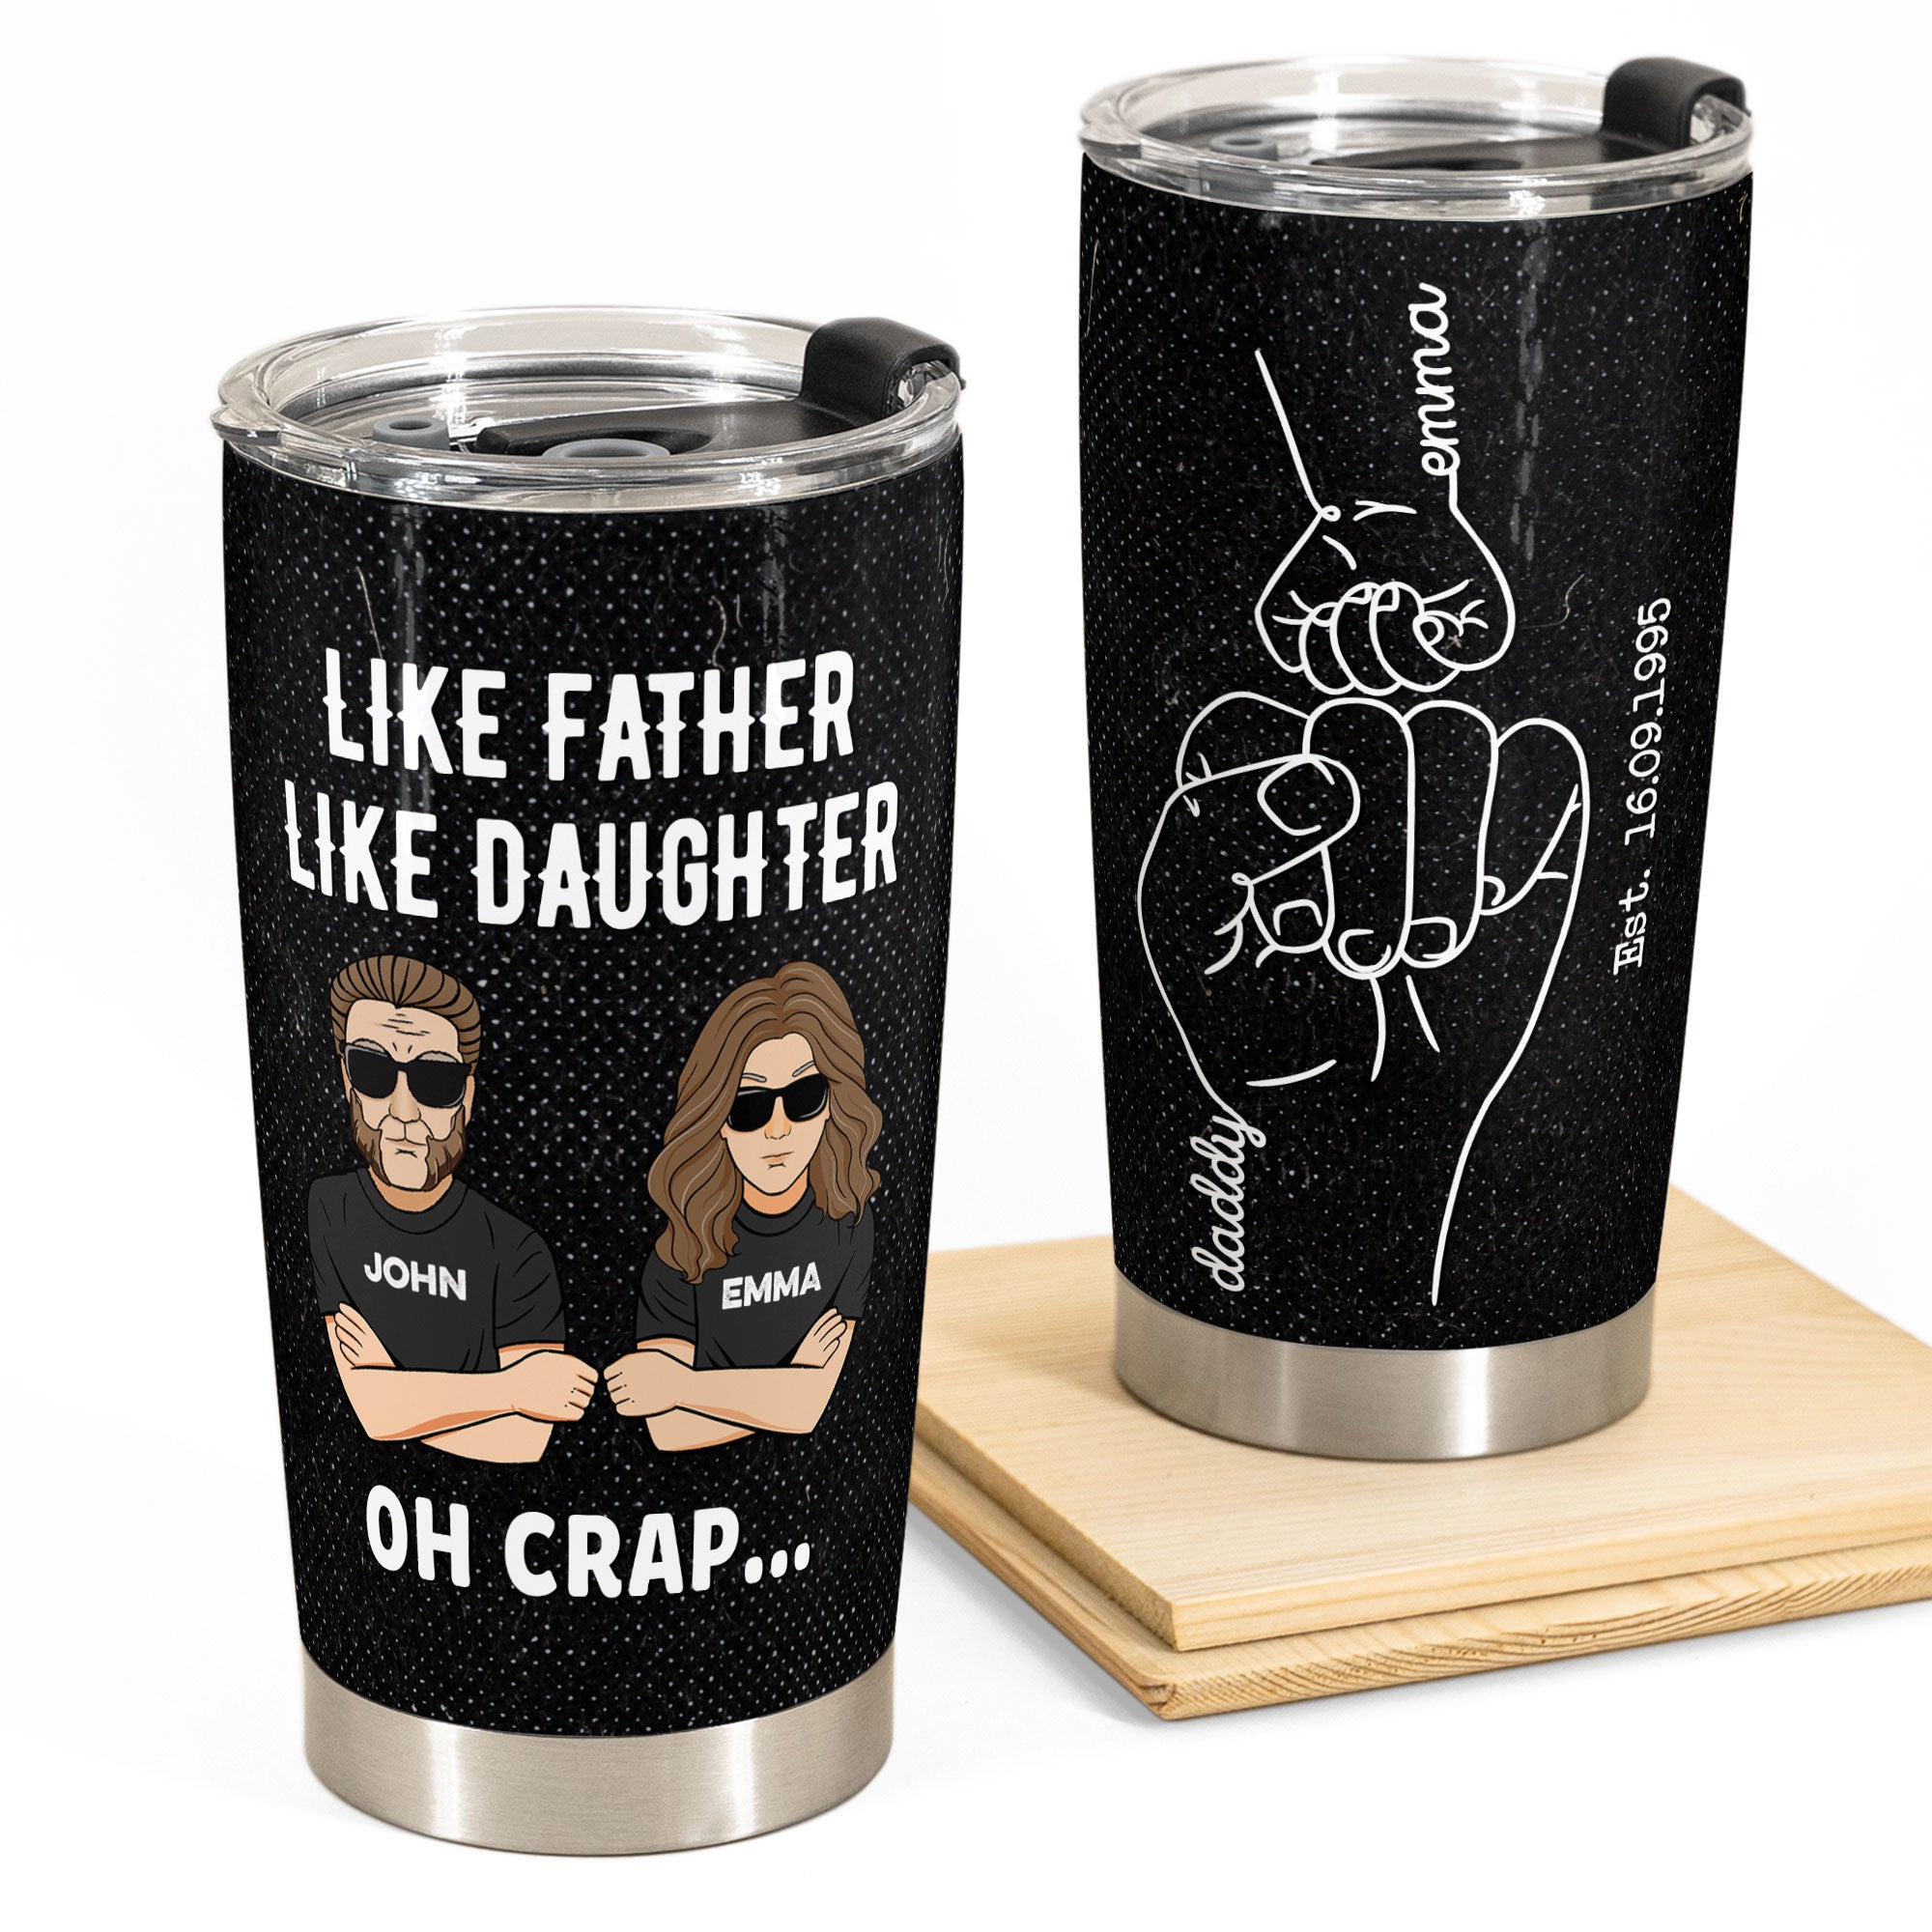 https://cdn.shopify.com/s/files/1/0499/6379/4592/products/Like-Father-Like-Daughter-Oh-Crap--Personalized-Tumbler-Cup-Fathers-Day_-Birthday-Gift-For-Dad_-Father_-Daughter-_1.jpg?v=1652165316